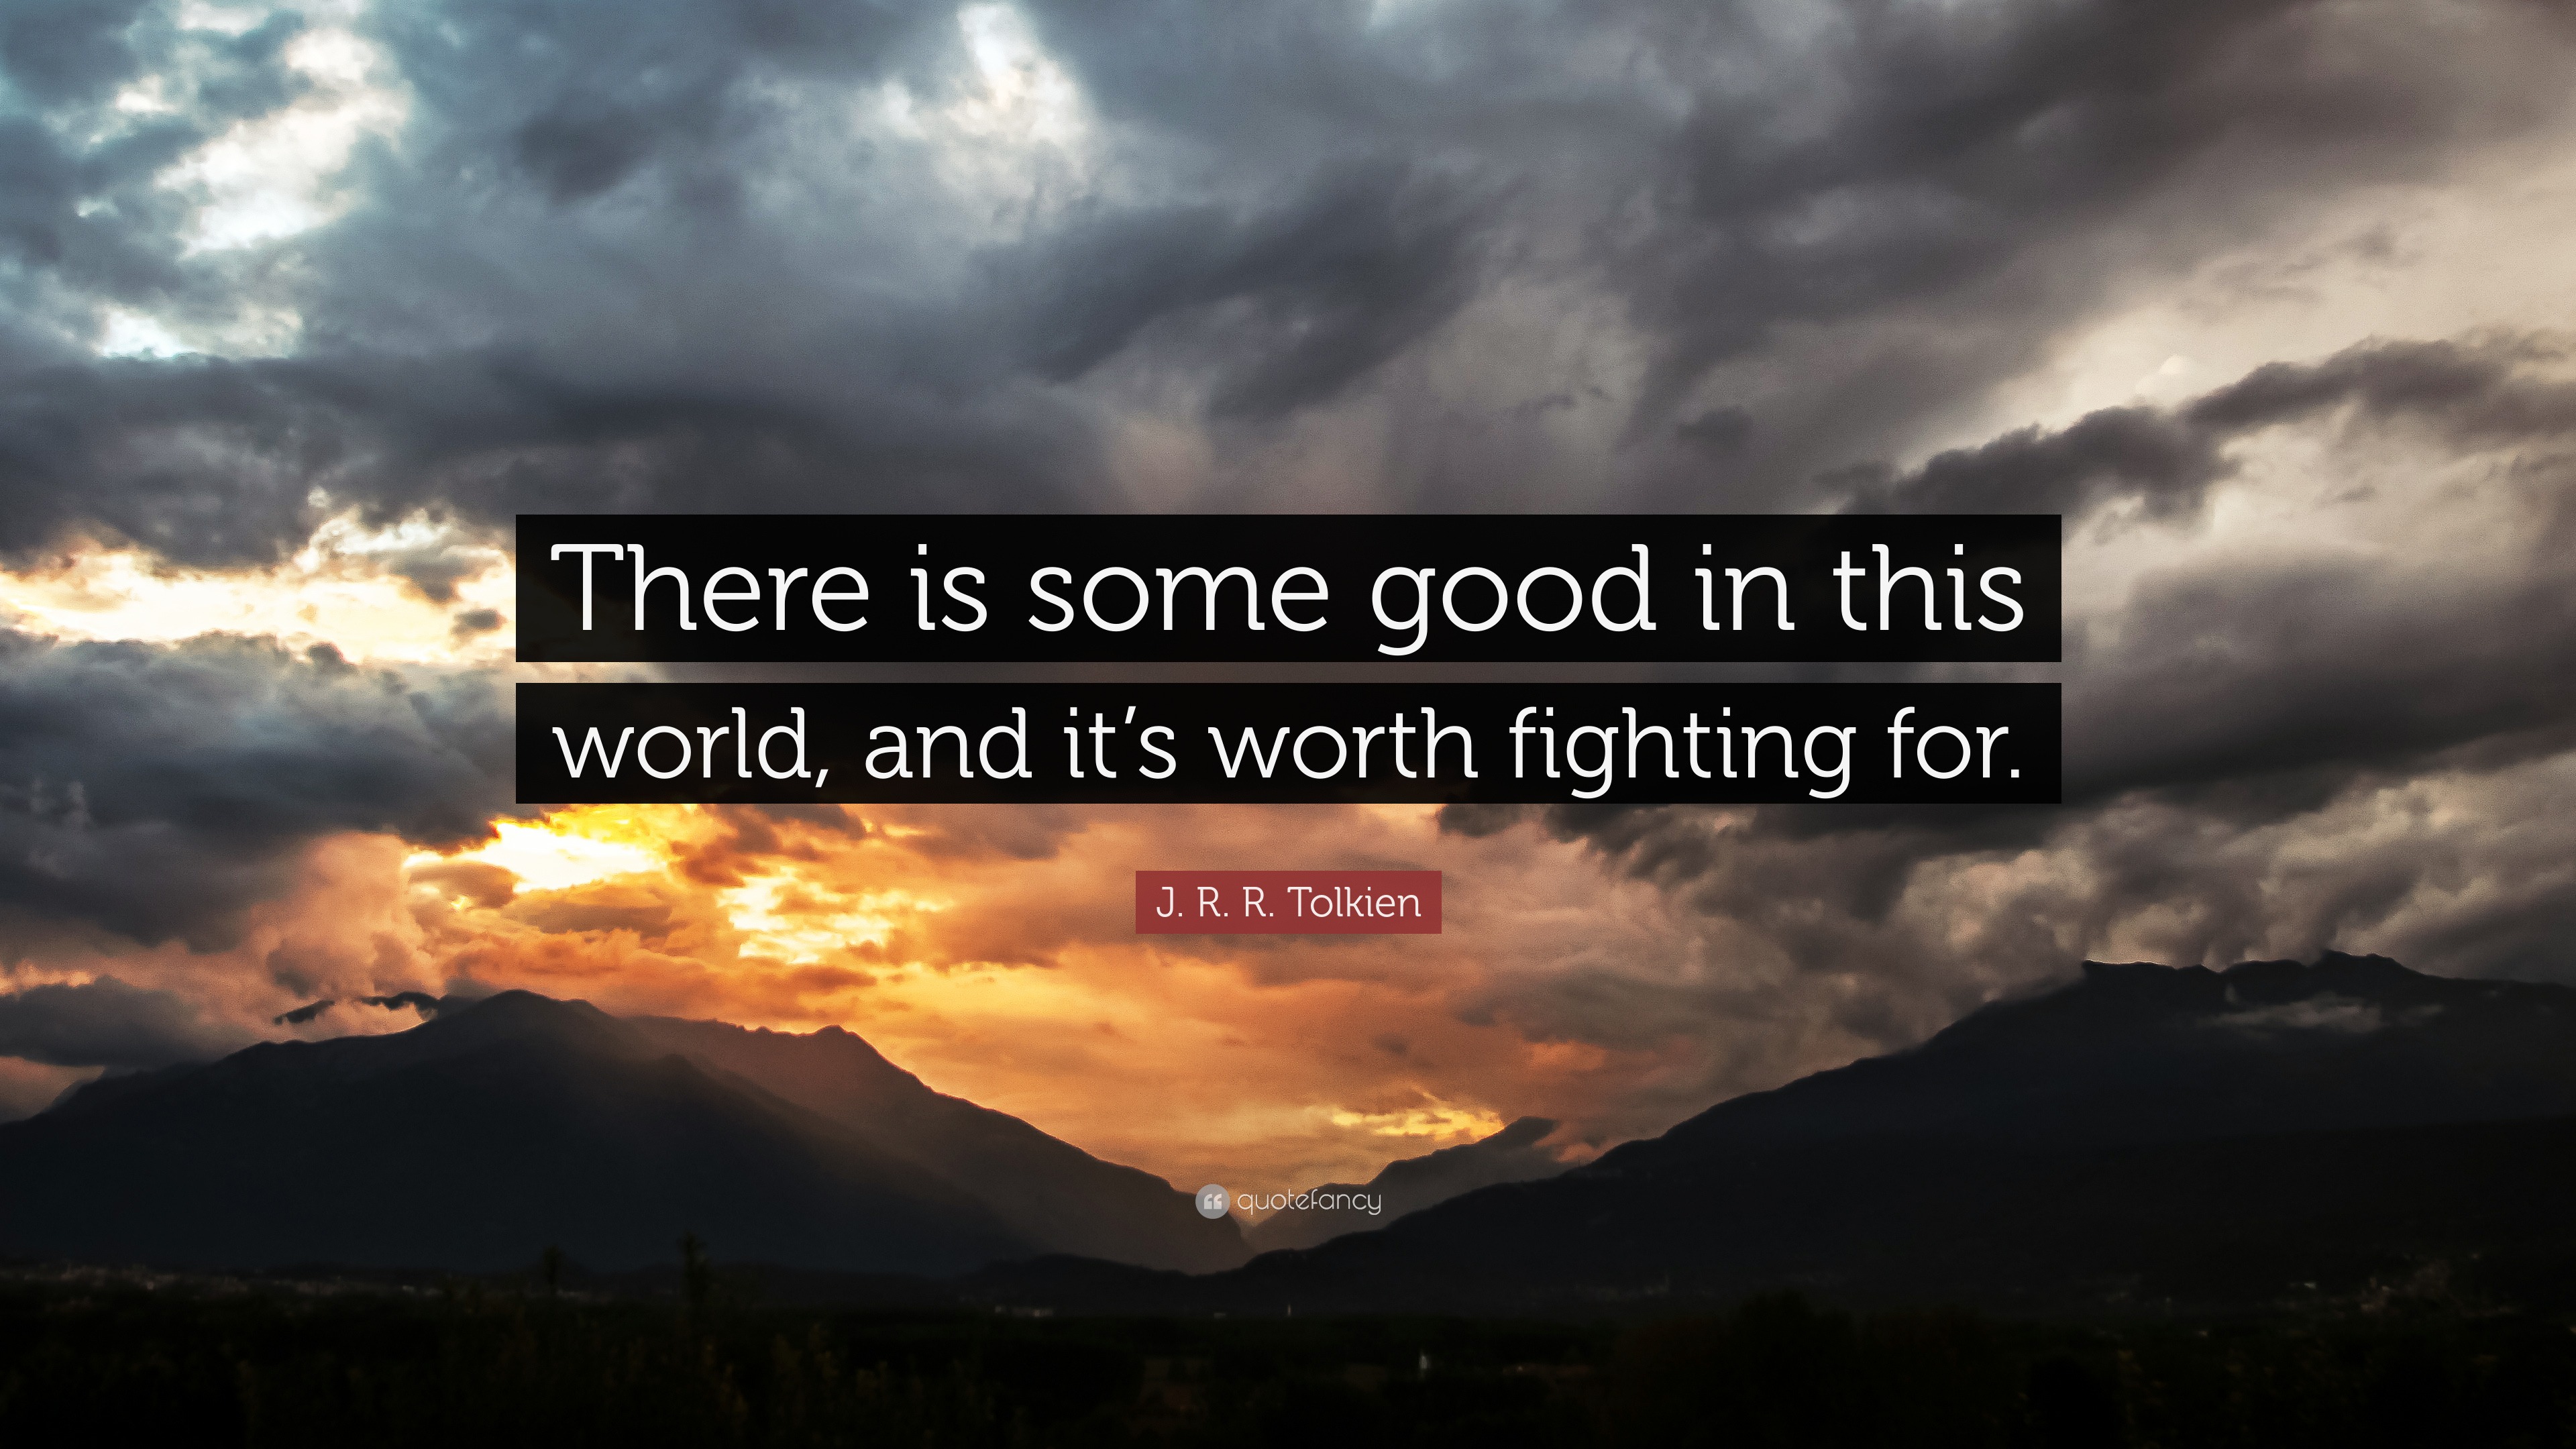 J. R. R. Tolkien Quote: “There is some good in this world, and it’s